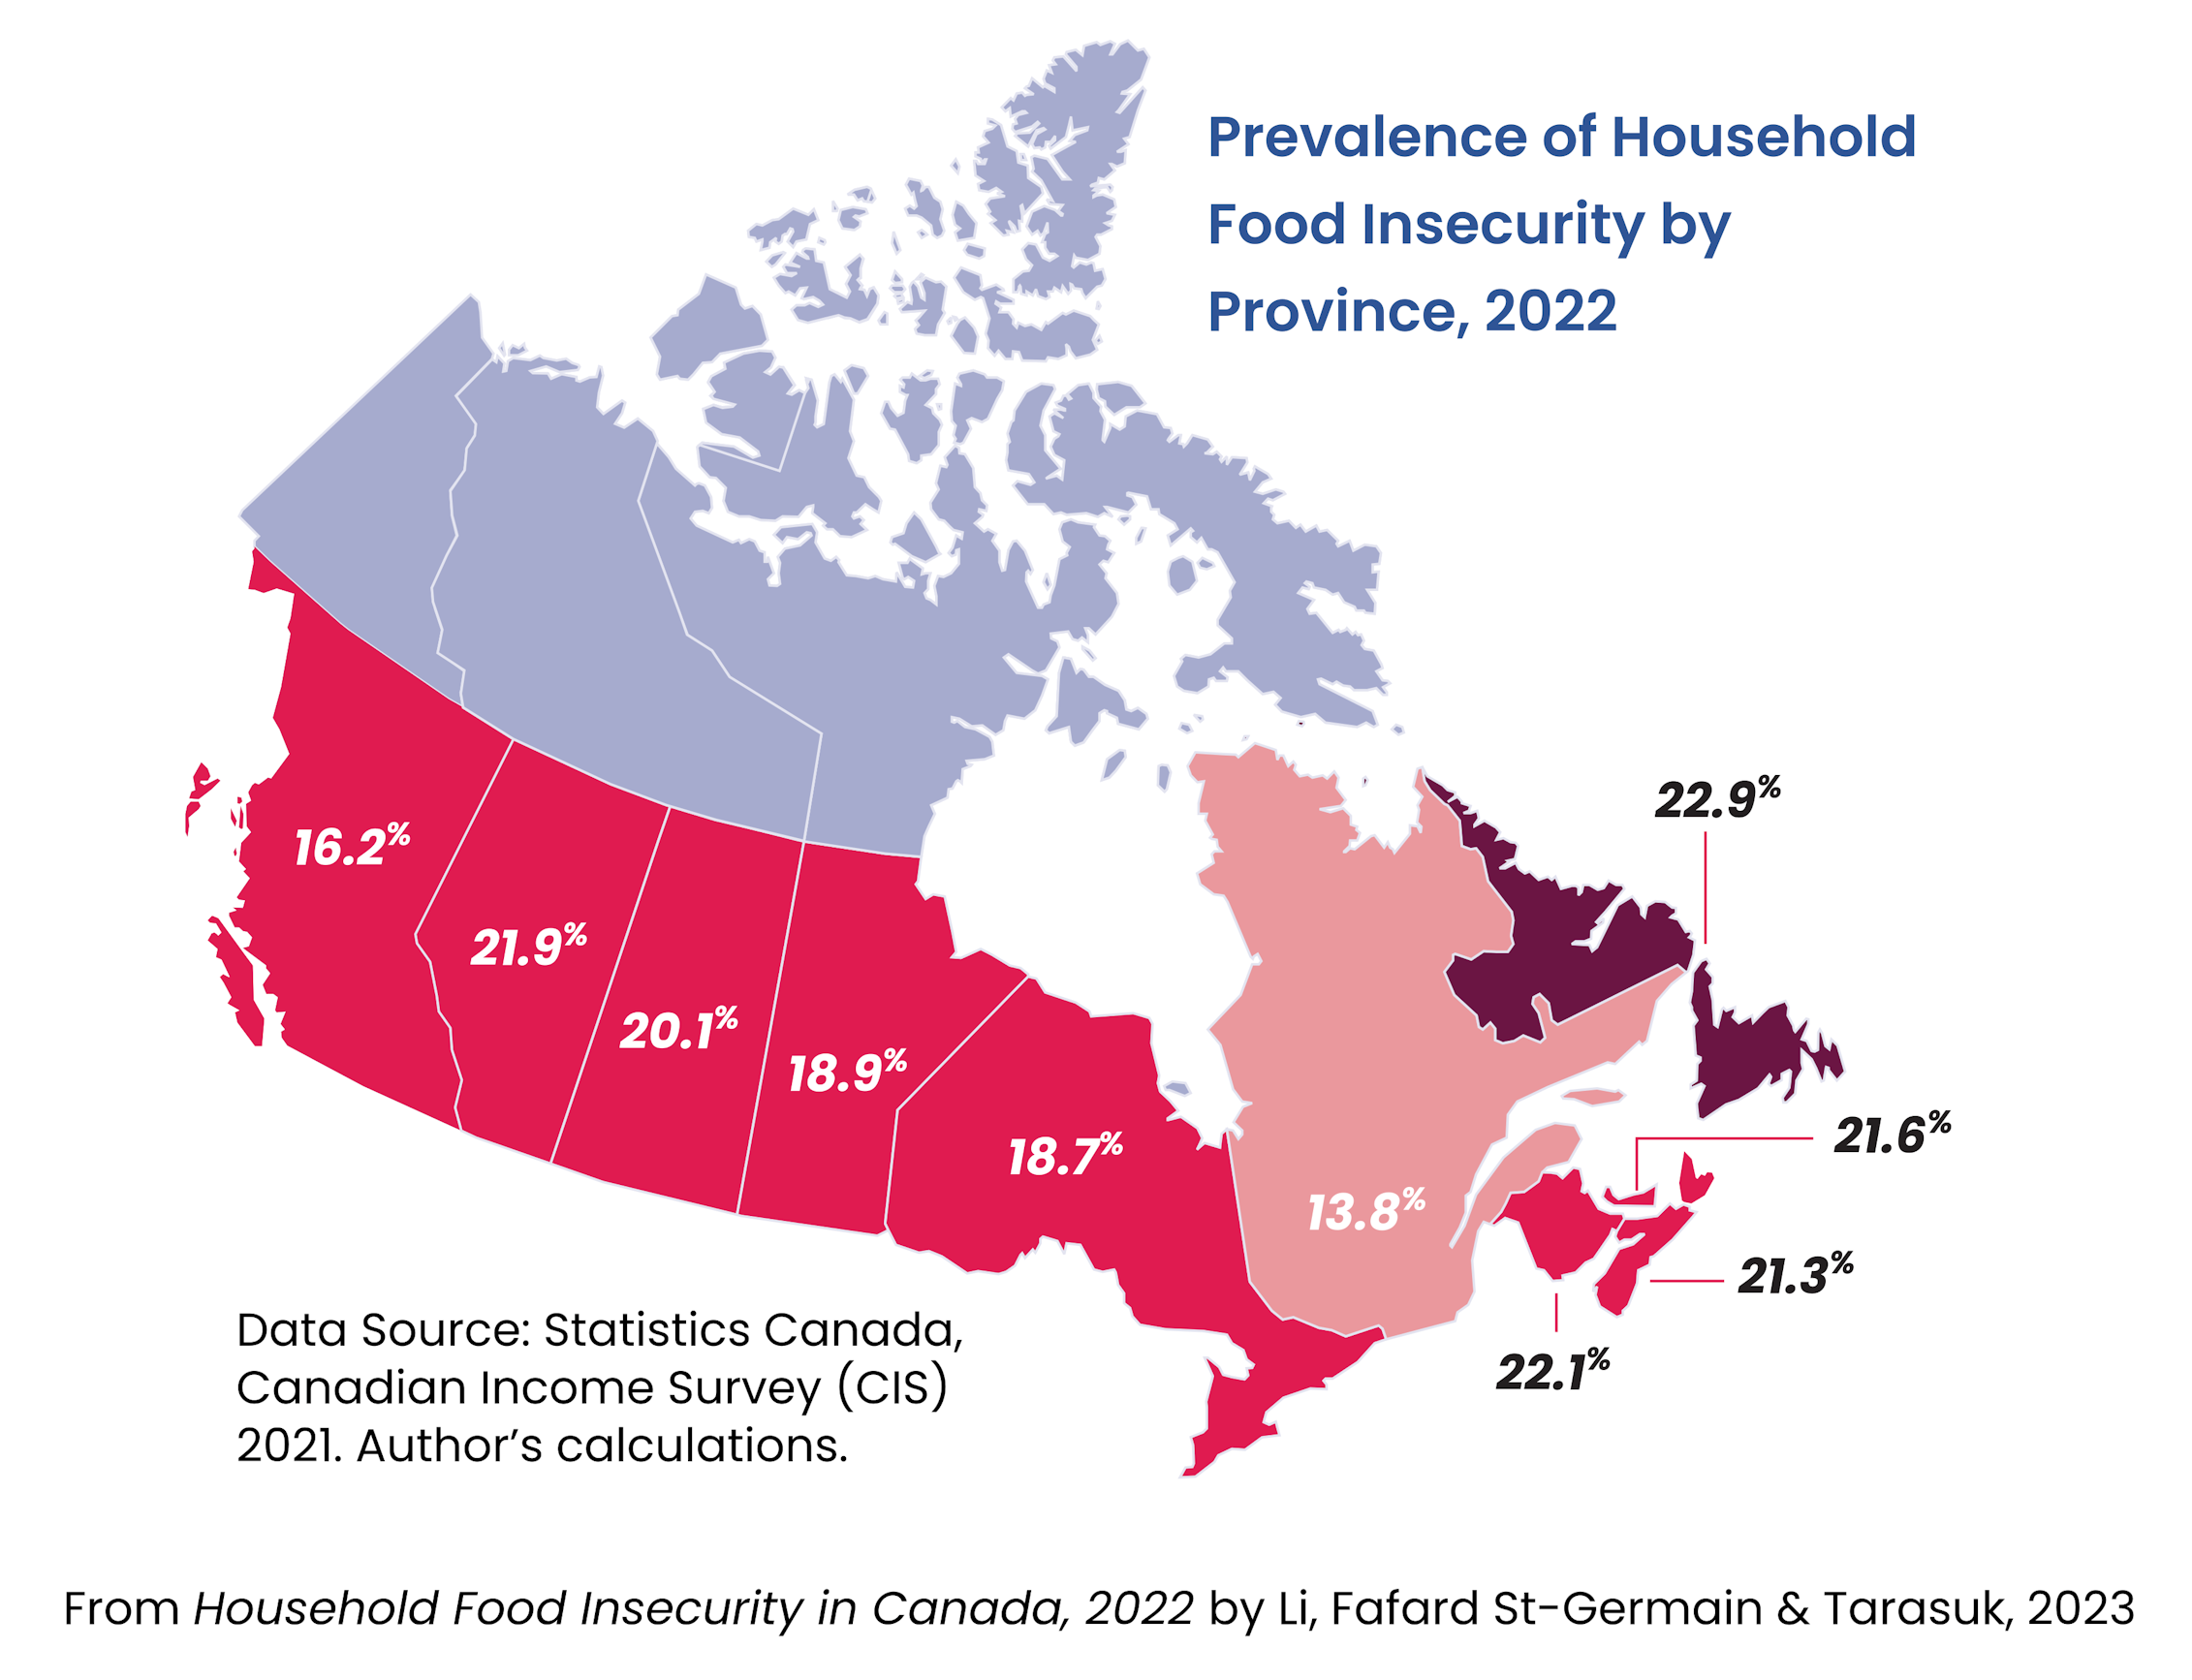 A graph shows food insecurity levels by province.